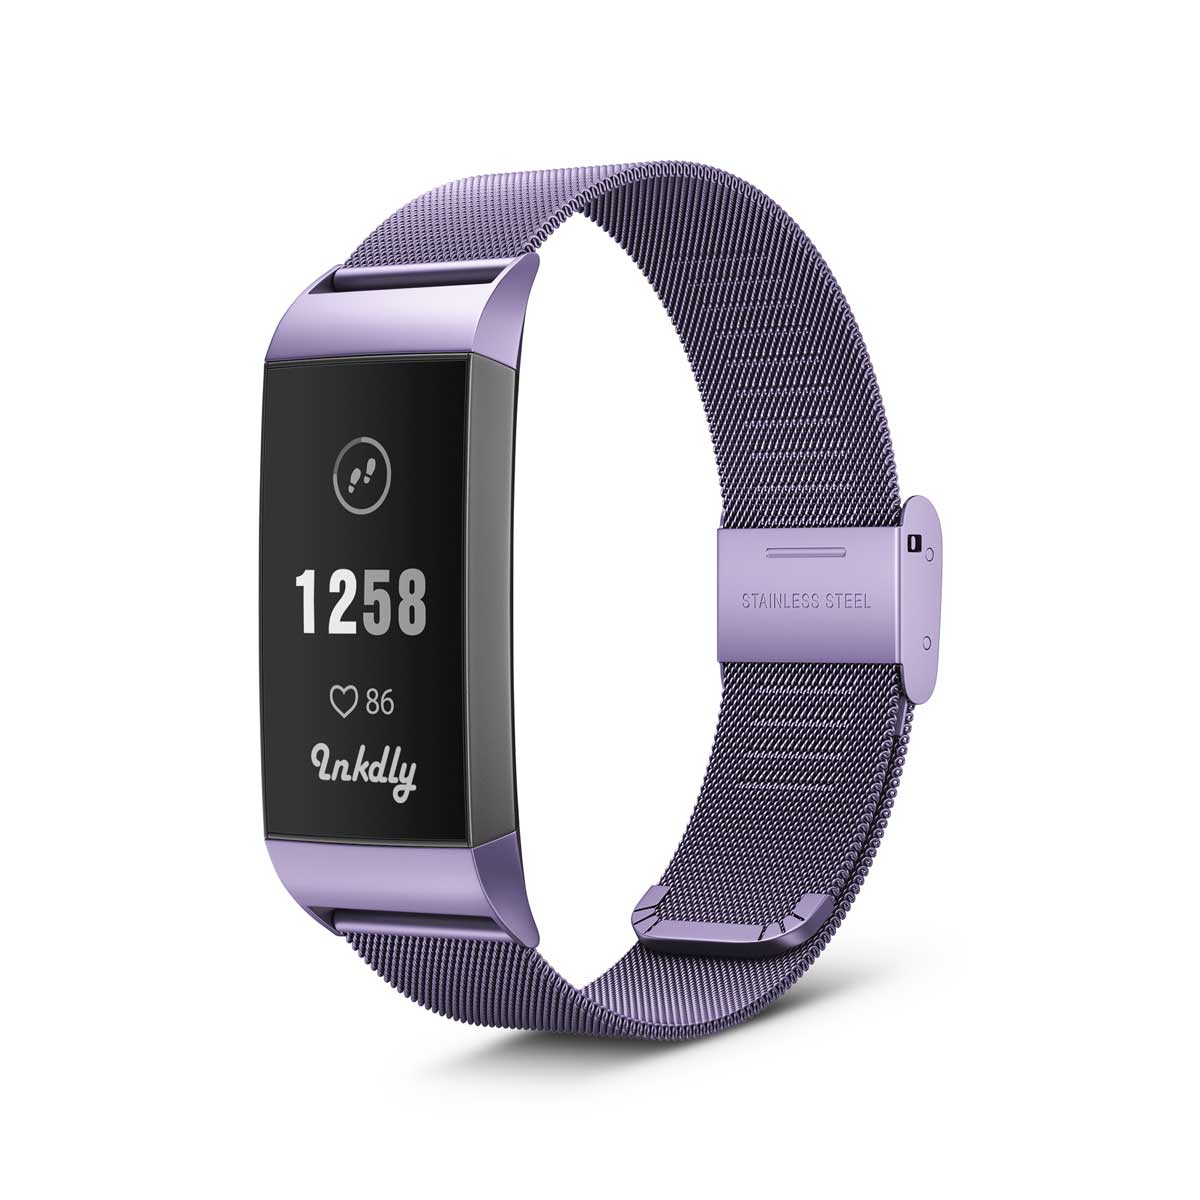 Milanese Fitbit Charge 3 & Charge 4 Band Replacement Quick Release Light Purple  